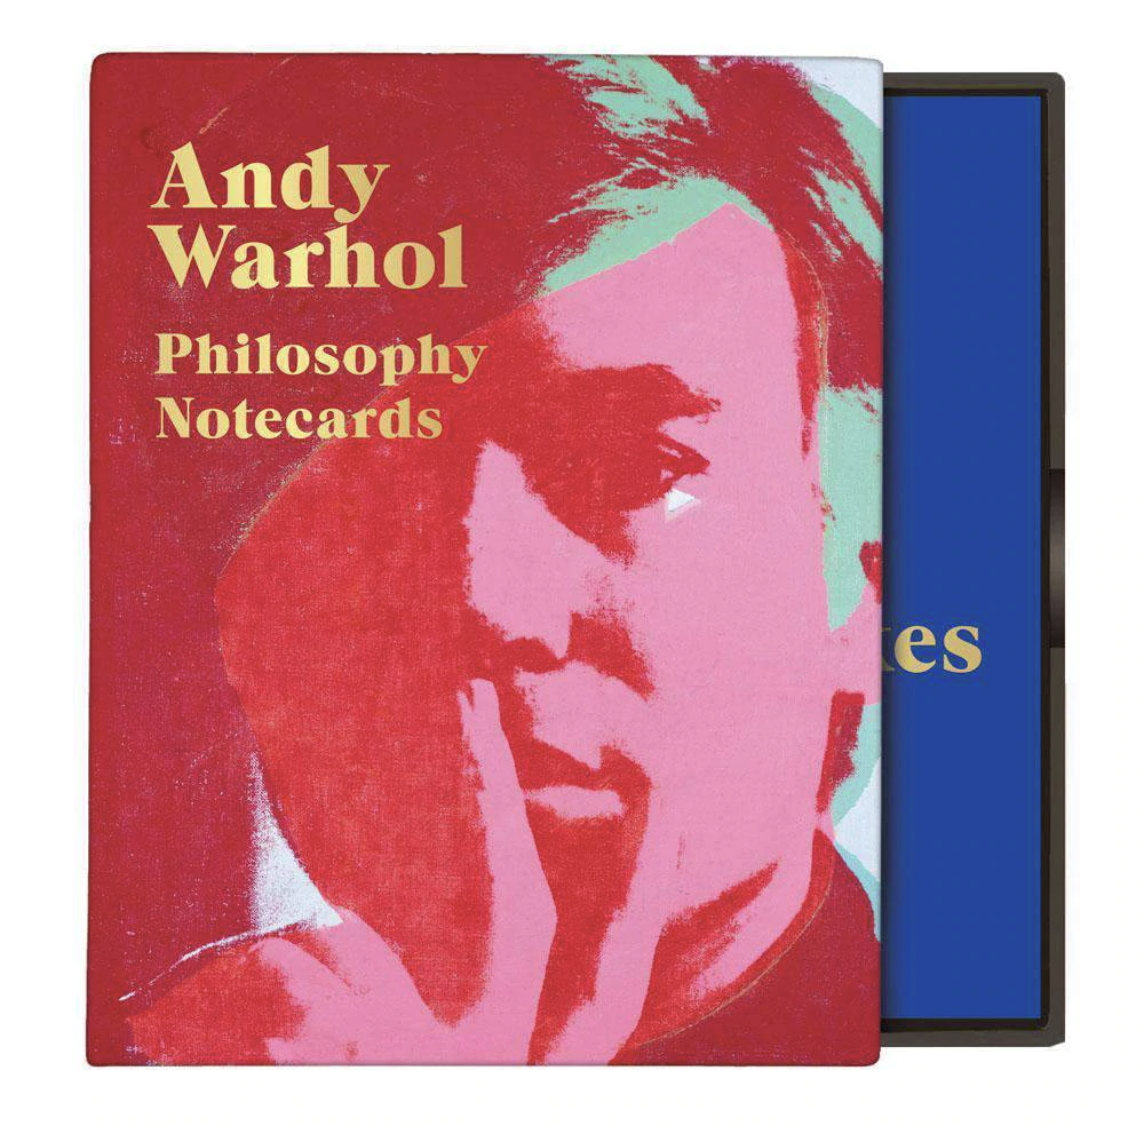 Andy Warhol Philosophy Assortment Notecards